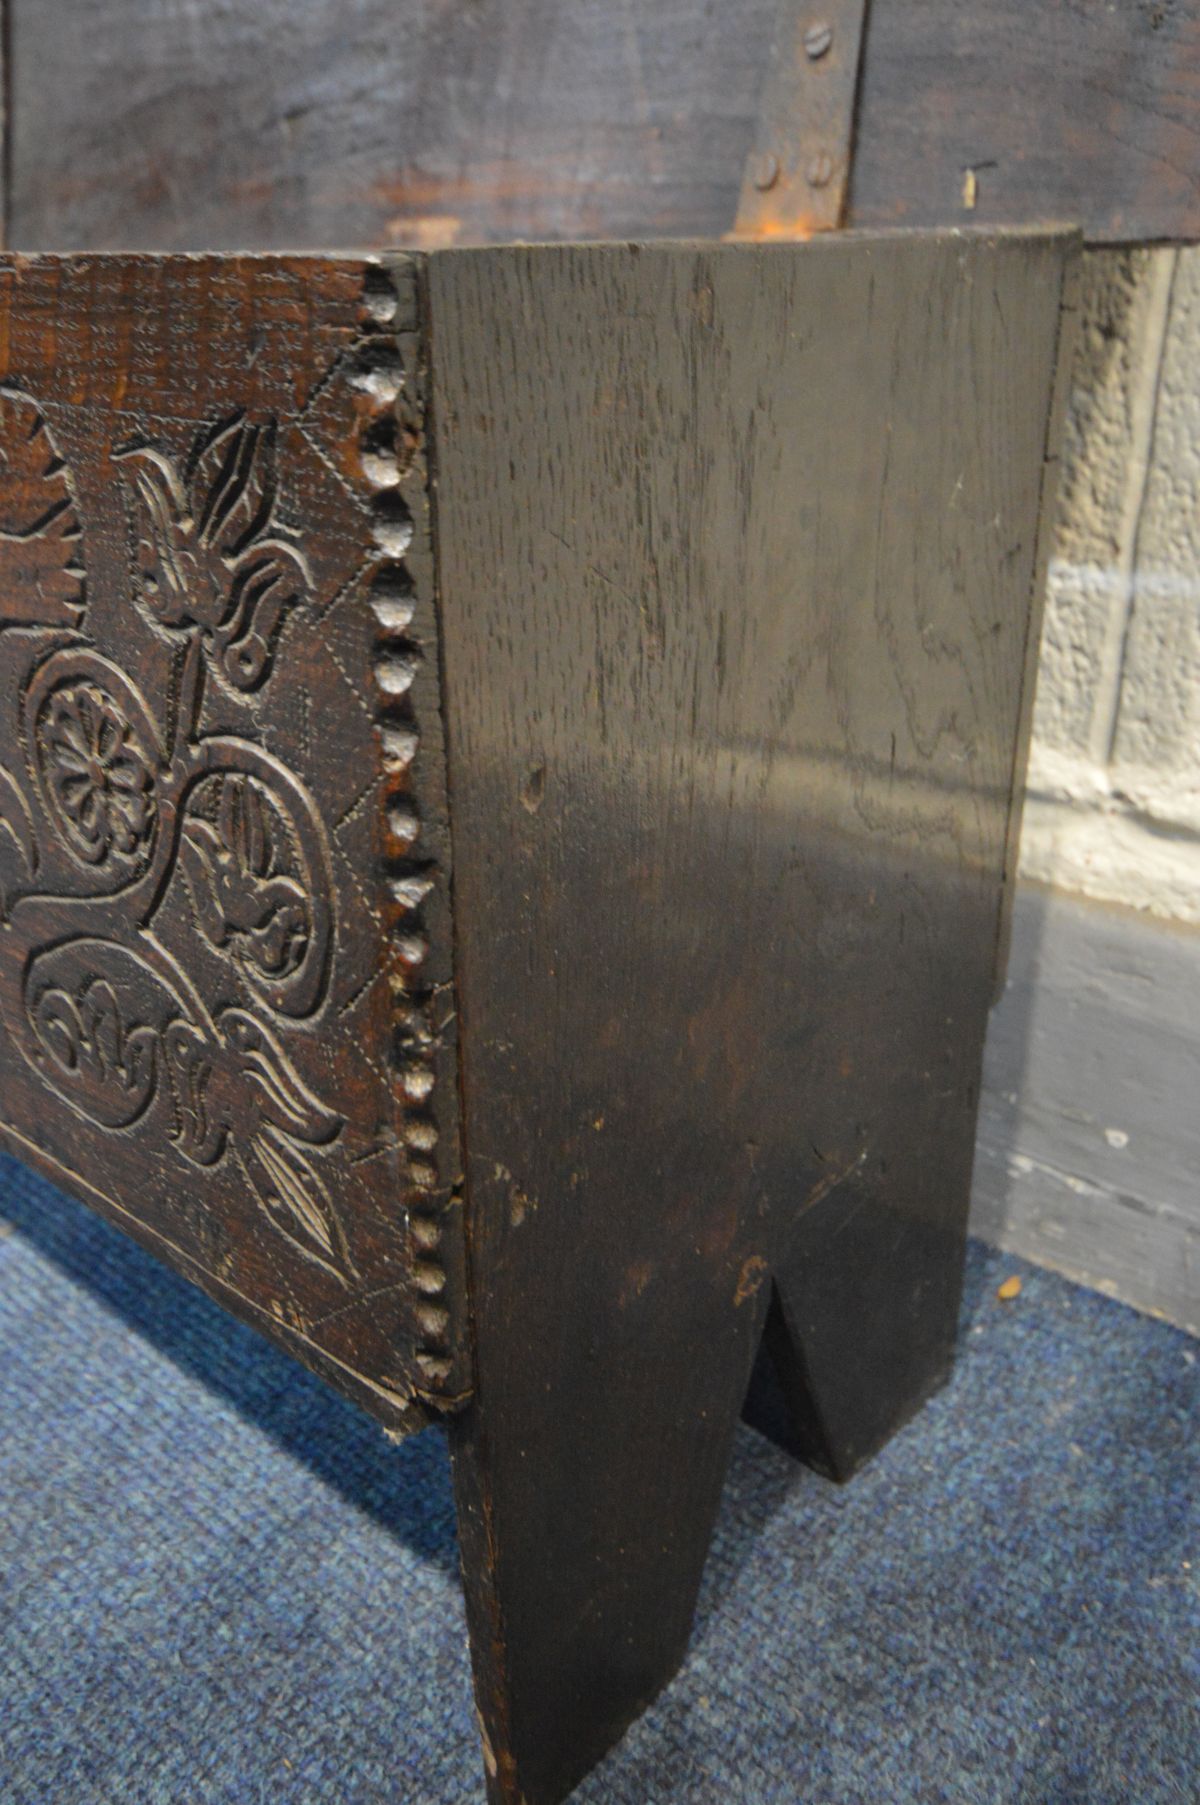 AN EARLY 18TH CENTURY OAK SIX PLANK BOARDED CHEST, with a moulded edge and iron hinged lid, and - Image 6 of 6